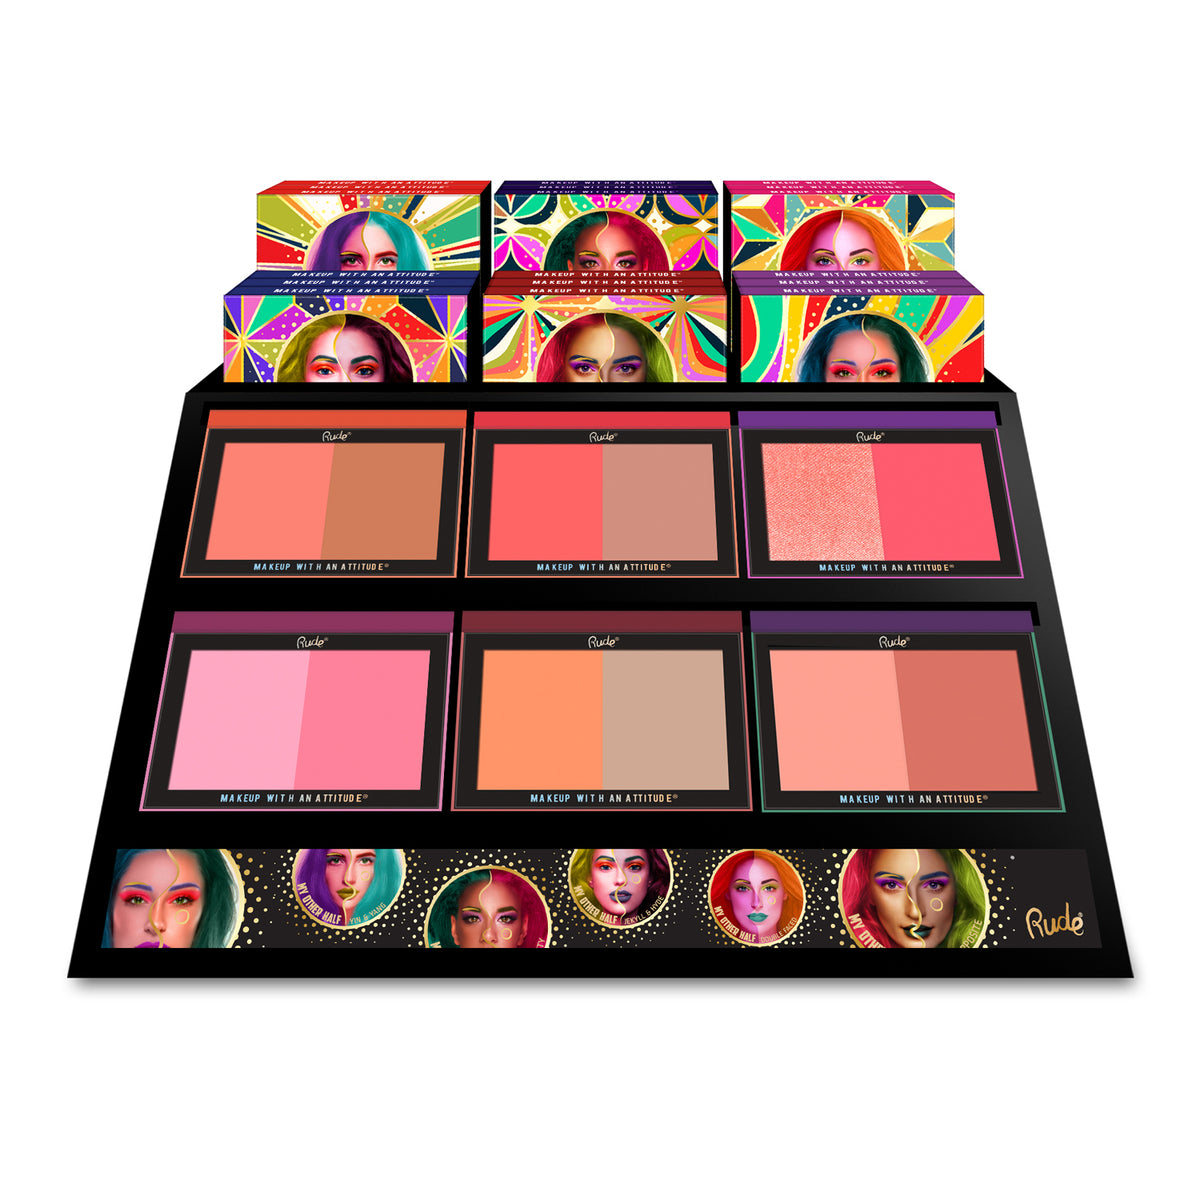 My Other Half Duo Shade Palette Display Set, 72 pcs